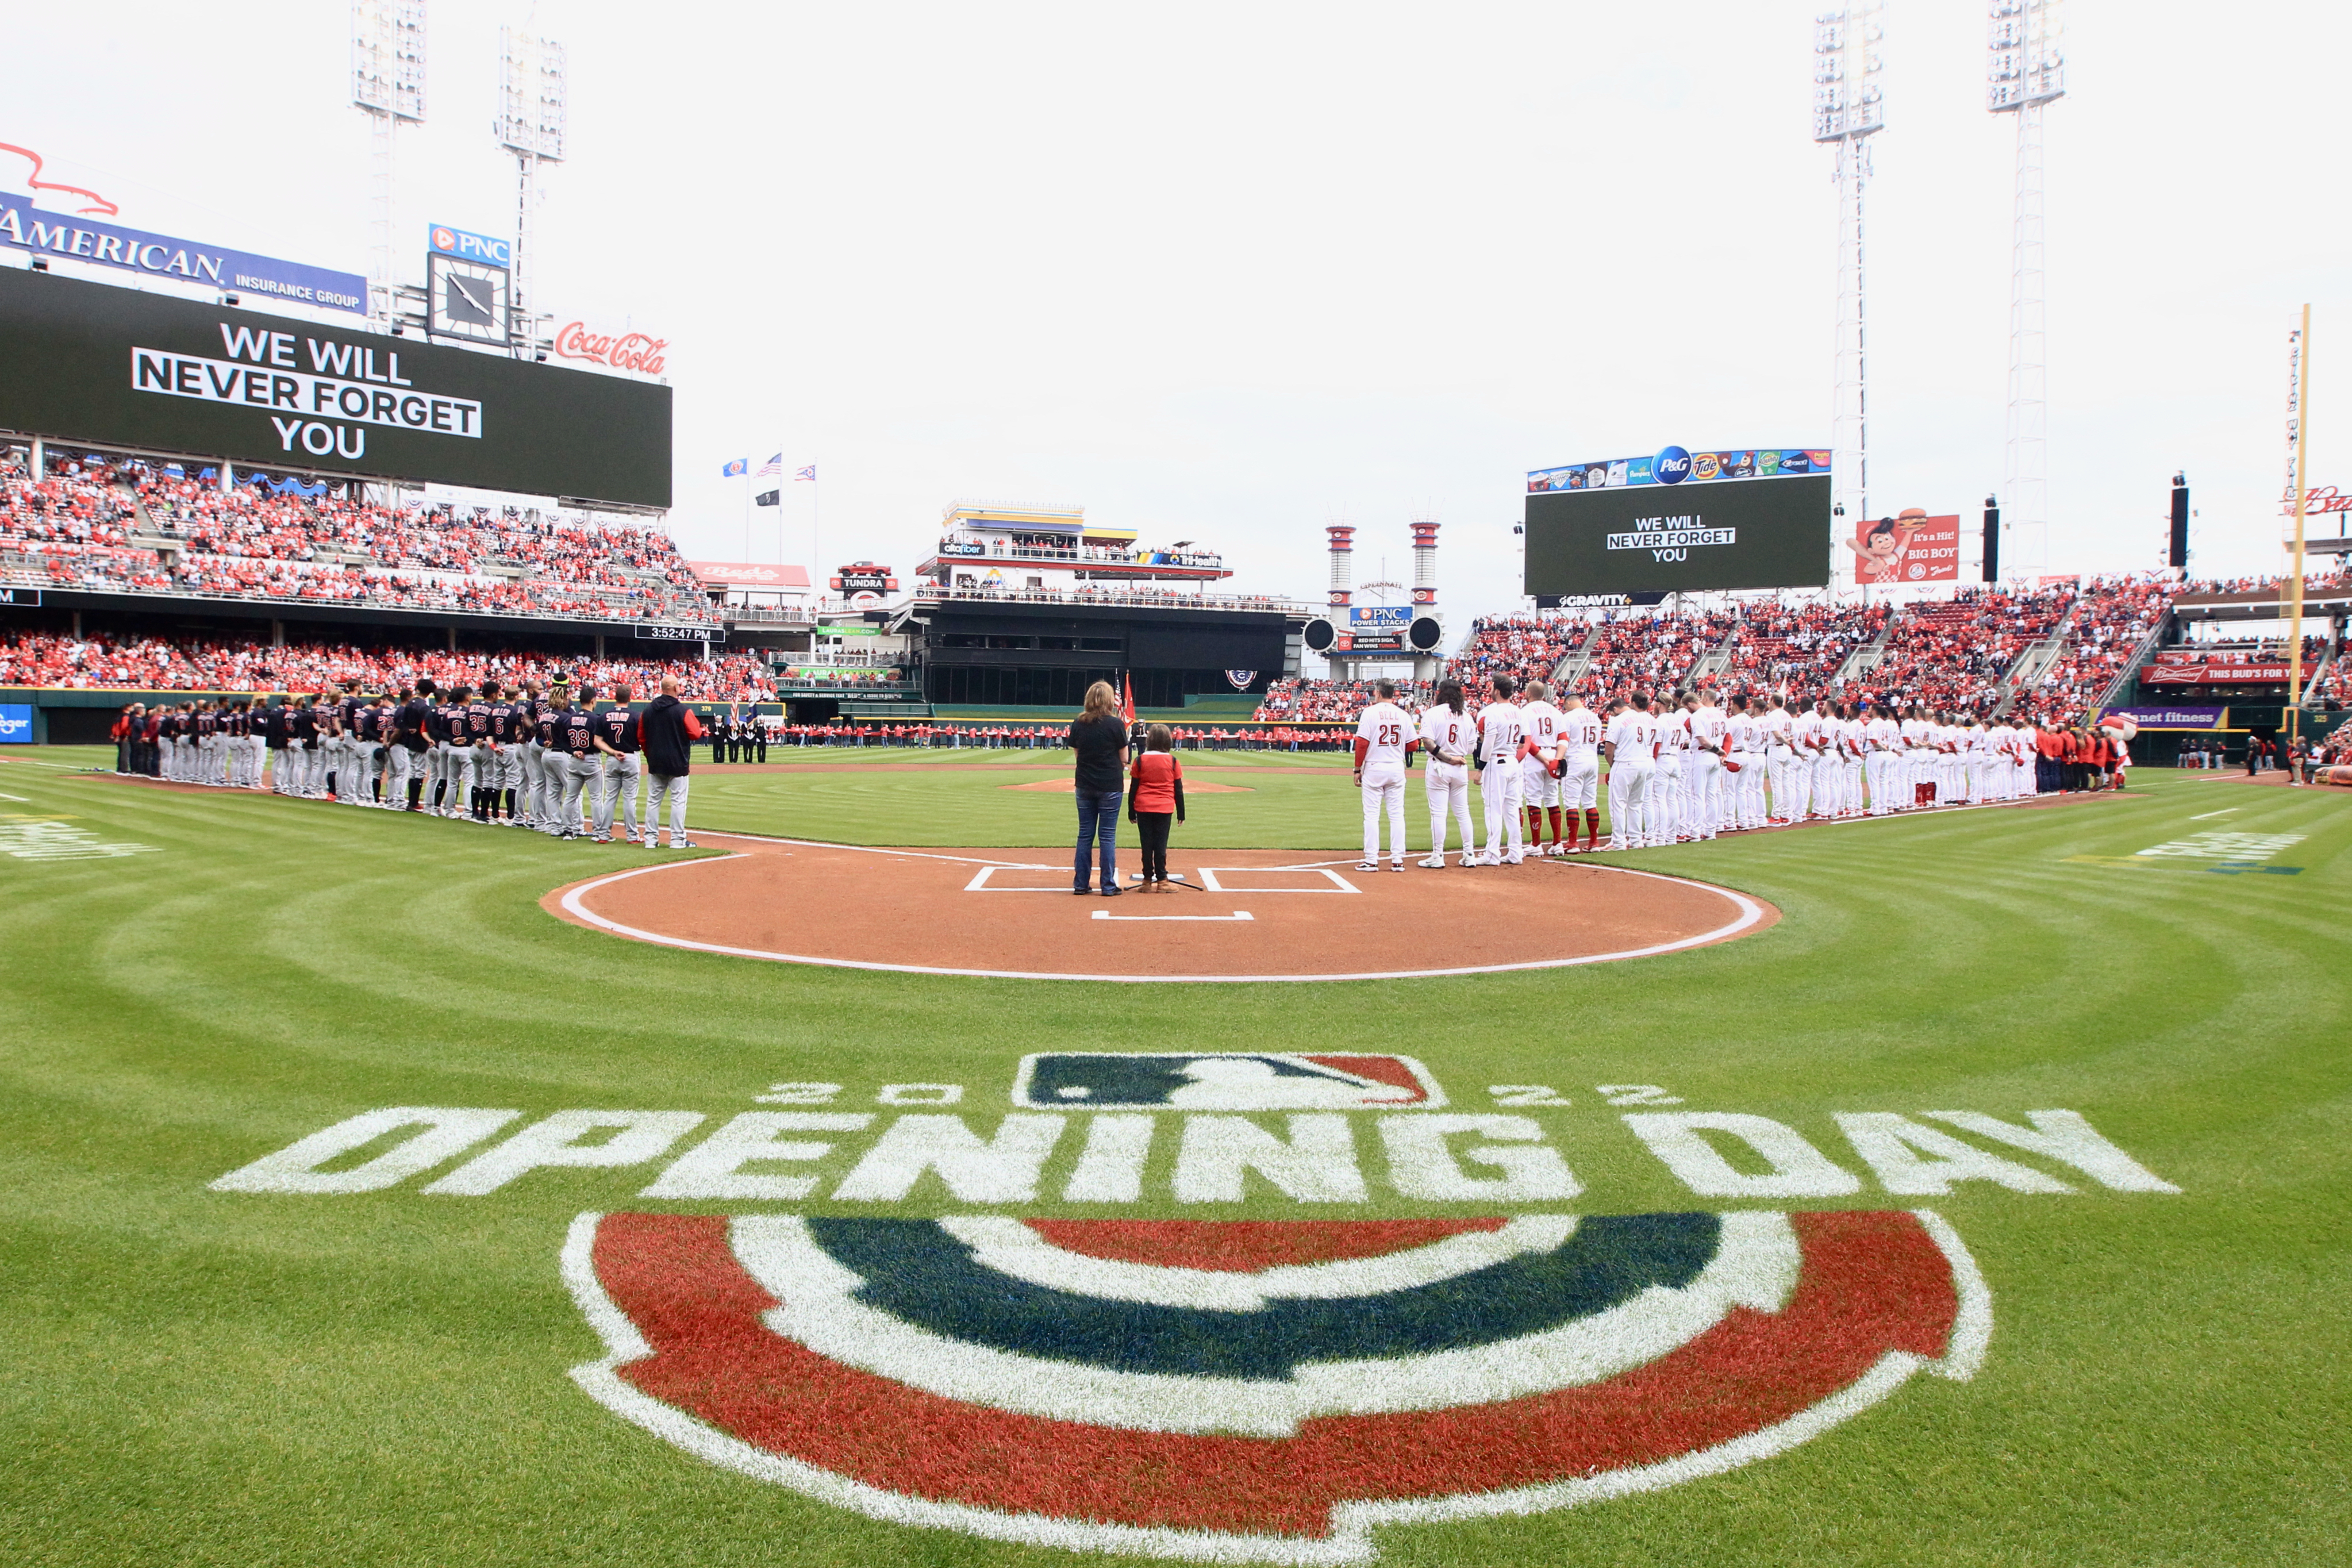 Who plays for the Reds? Here's the Cincinnati Reds roster 2022